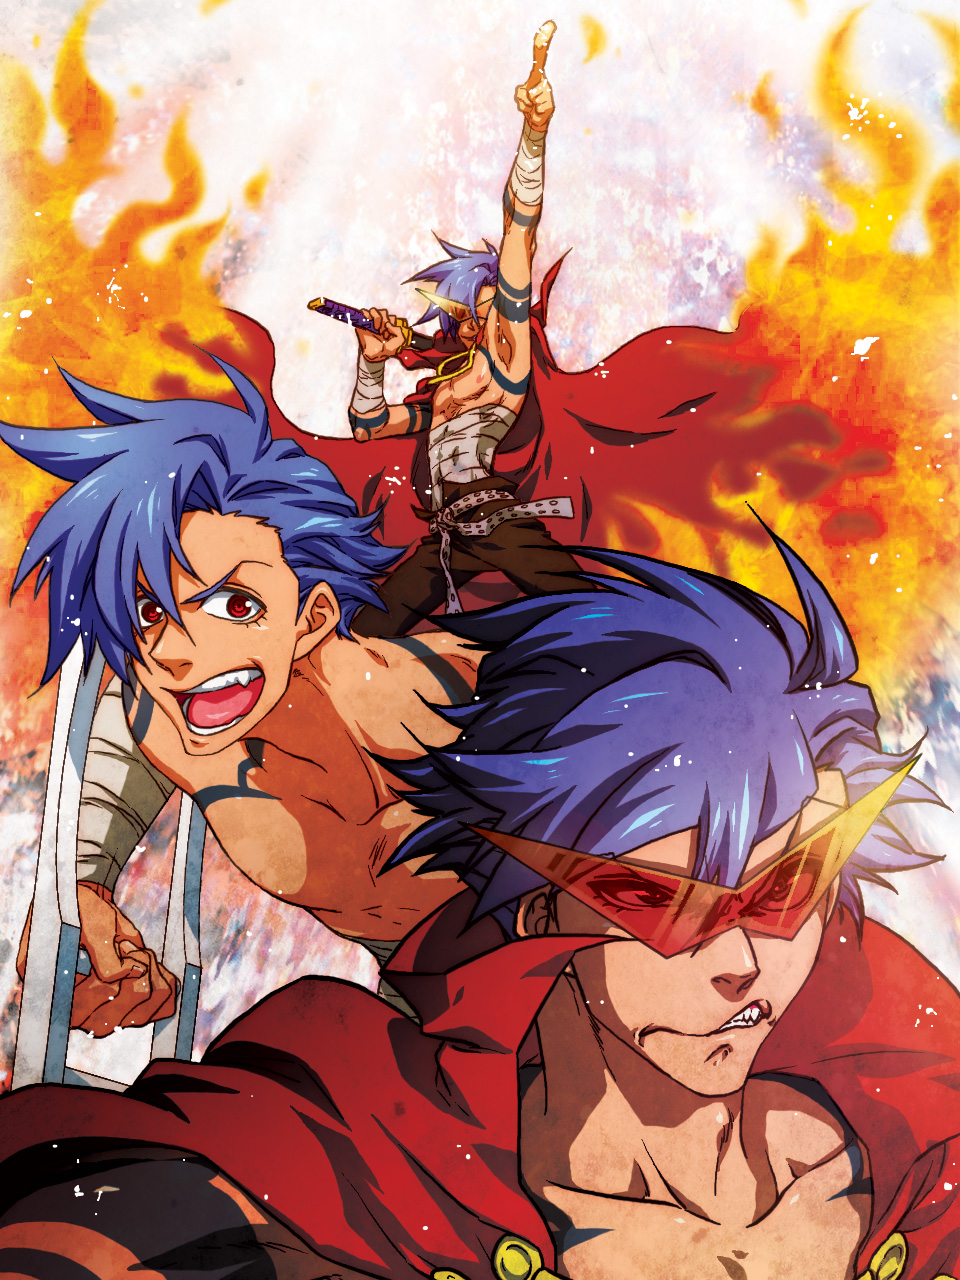 angry bandages cape fire highres kamina kuroko_(sunege) male pointing pose shirtless solo sunglasses sword tengen_toppa_gurren_lagann weapon